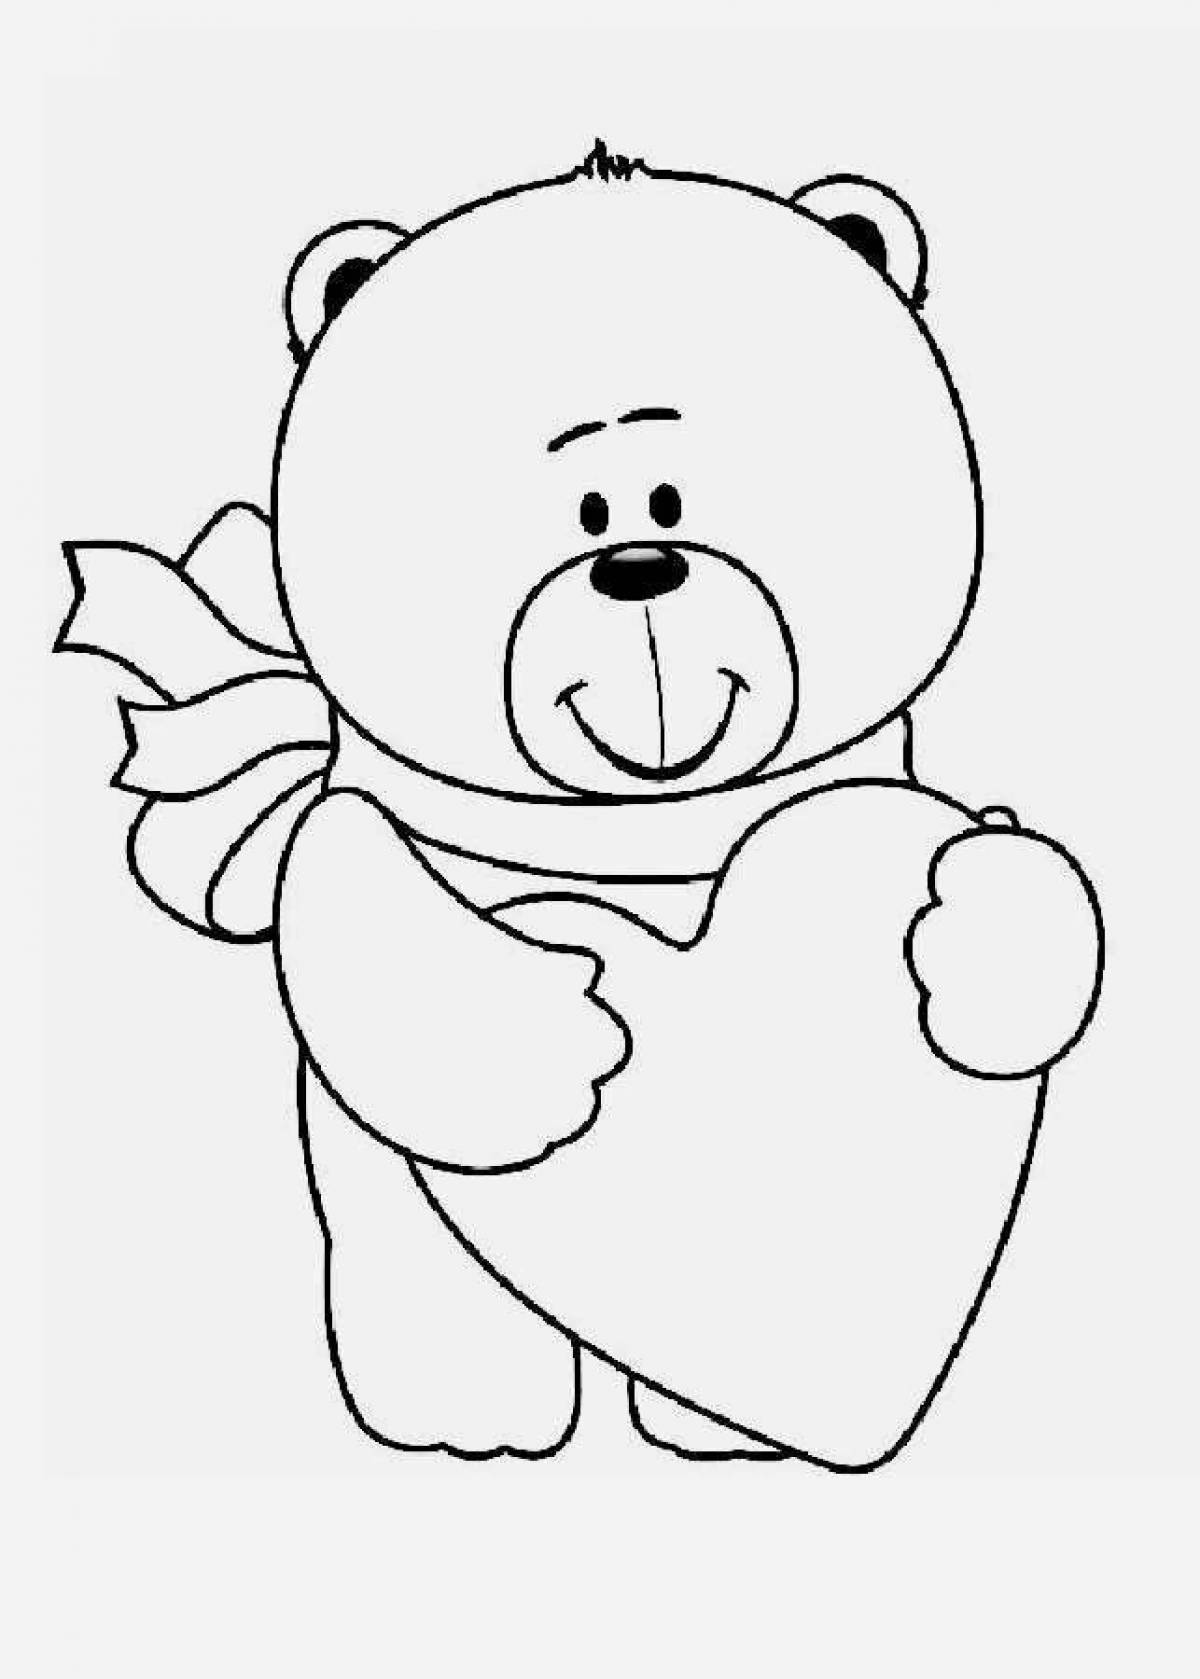 Care bear with heart coloring page